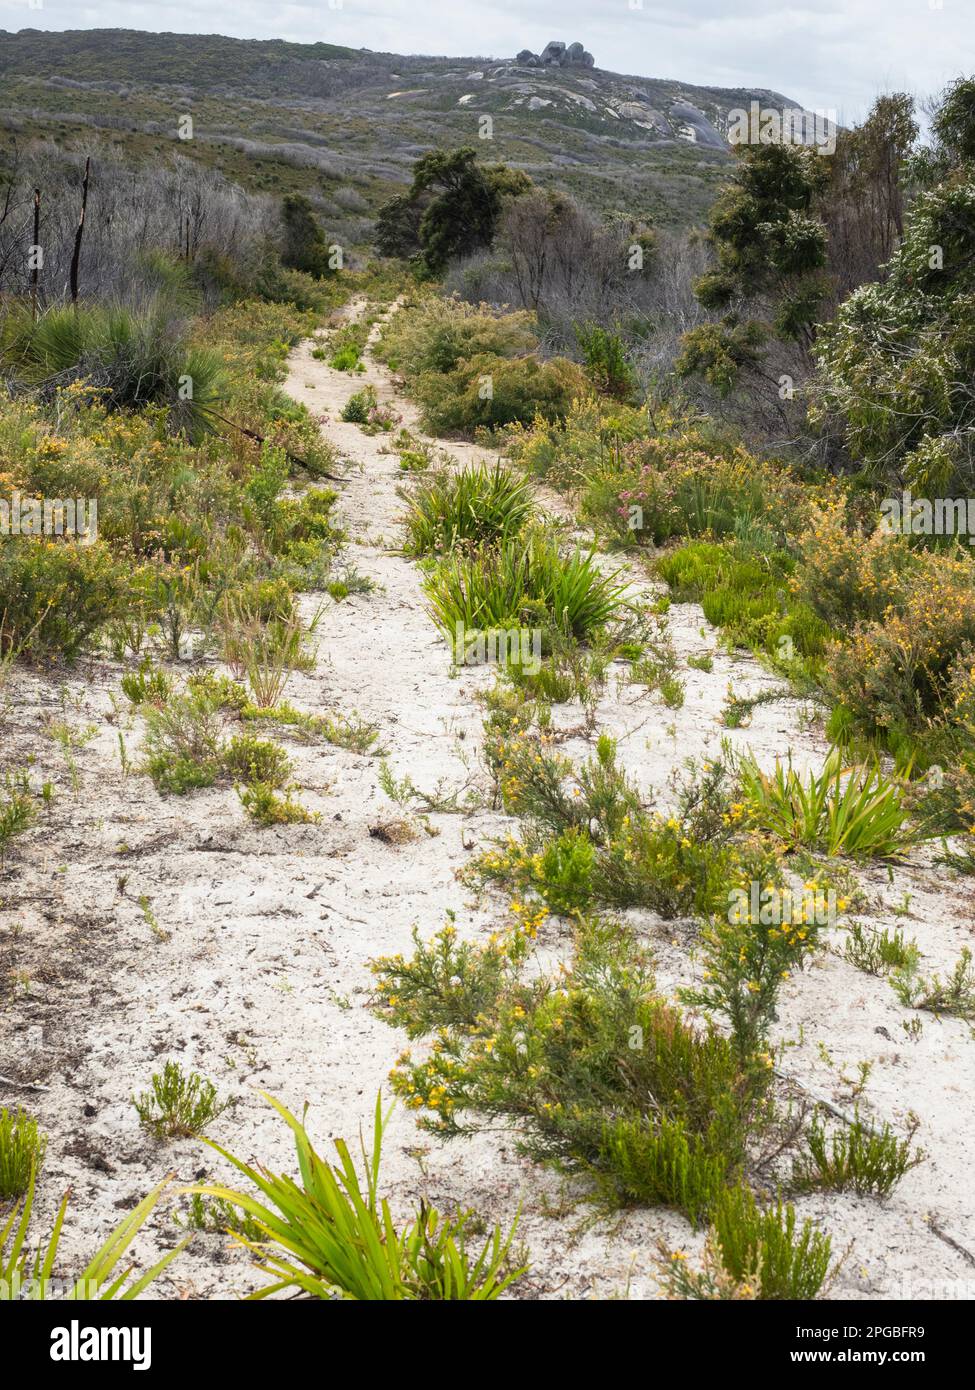 Wheel ruts leading through Nuyts Wilderness with Mount Hopkins on the horizon, Walpole-Nornalup National Park, Western Australia Stock Photo